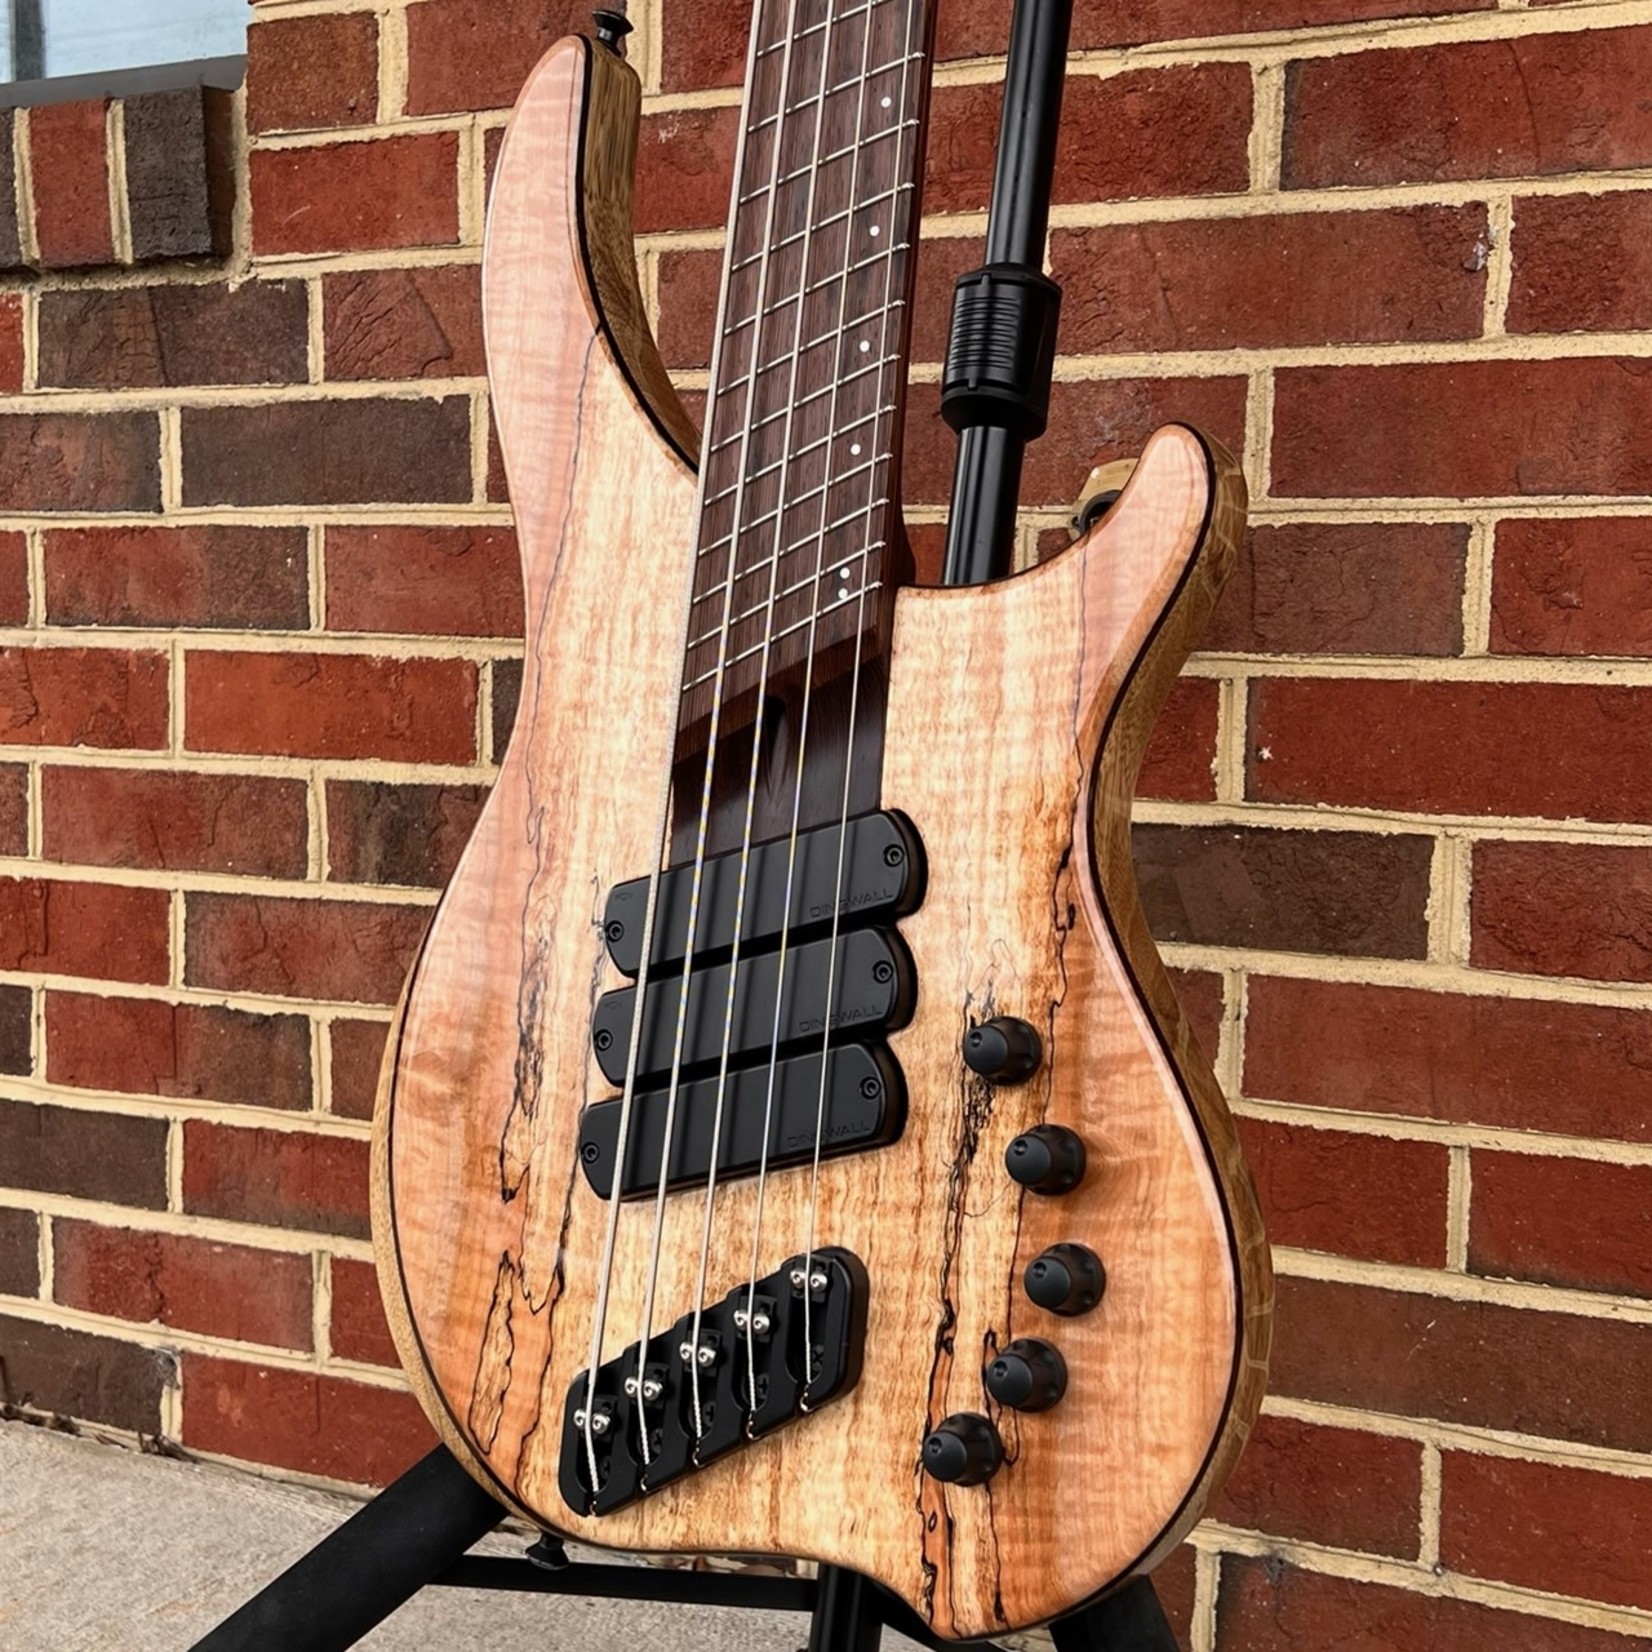 Dingwall Dingwall ABI Custom 5-String, 3x Pickups, X-Top #1308 Spalted Maple, Black Limba Body, Wenge Contrast Layer, Wenge Neck and Fretboard, Standard AB Inlays, Glockenklang 3-band EQ, Dingwall Gig Bag